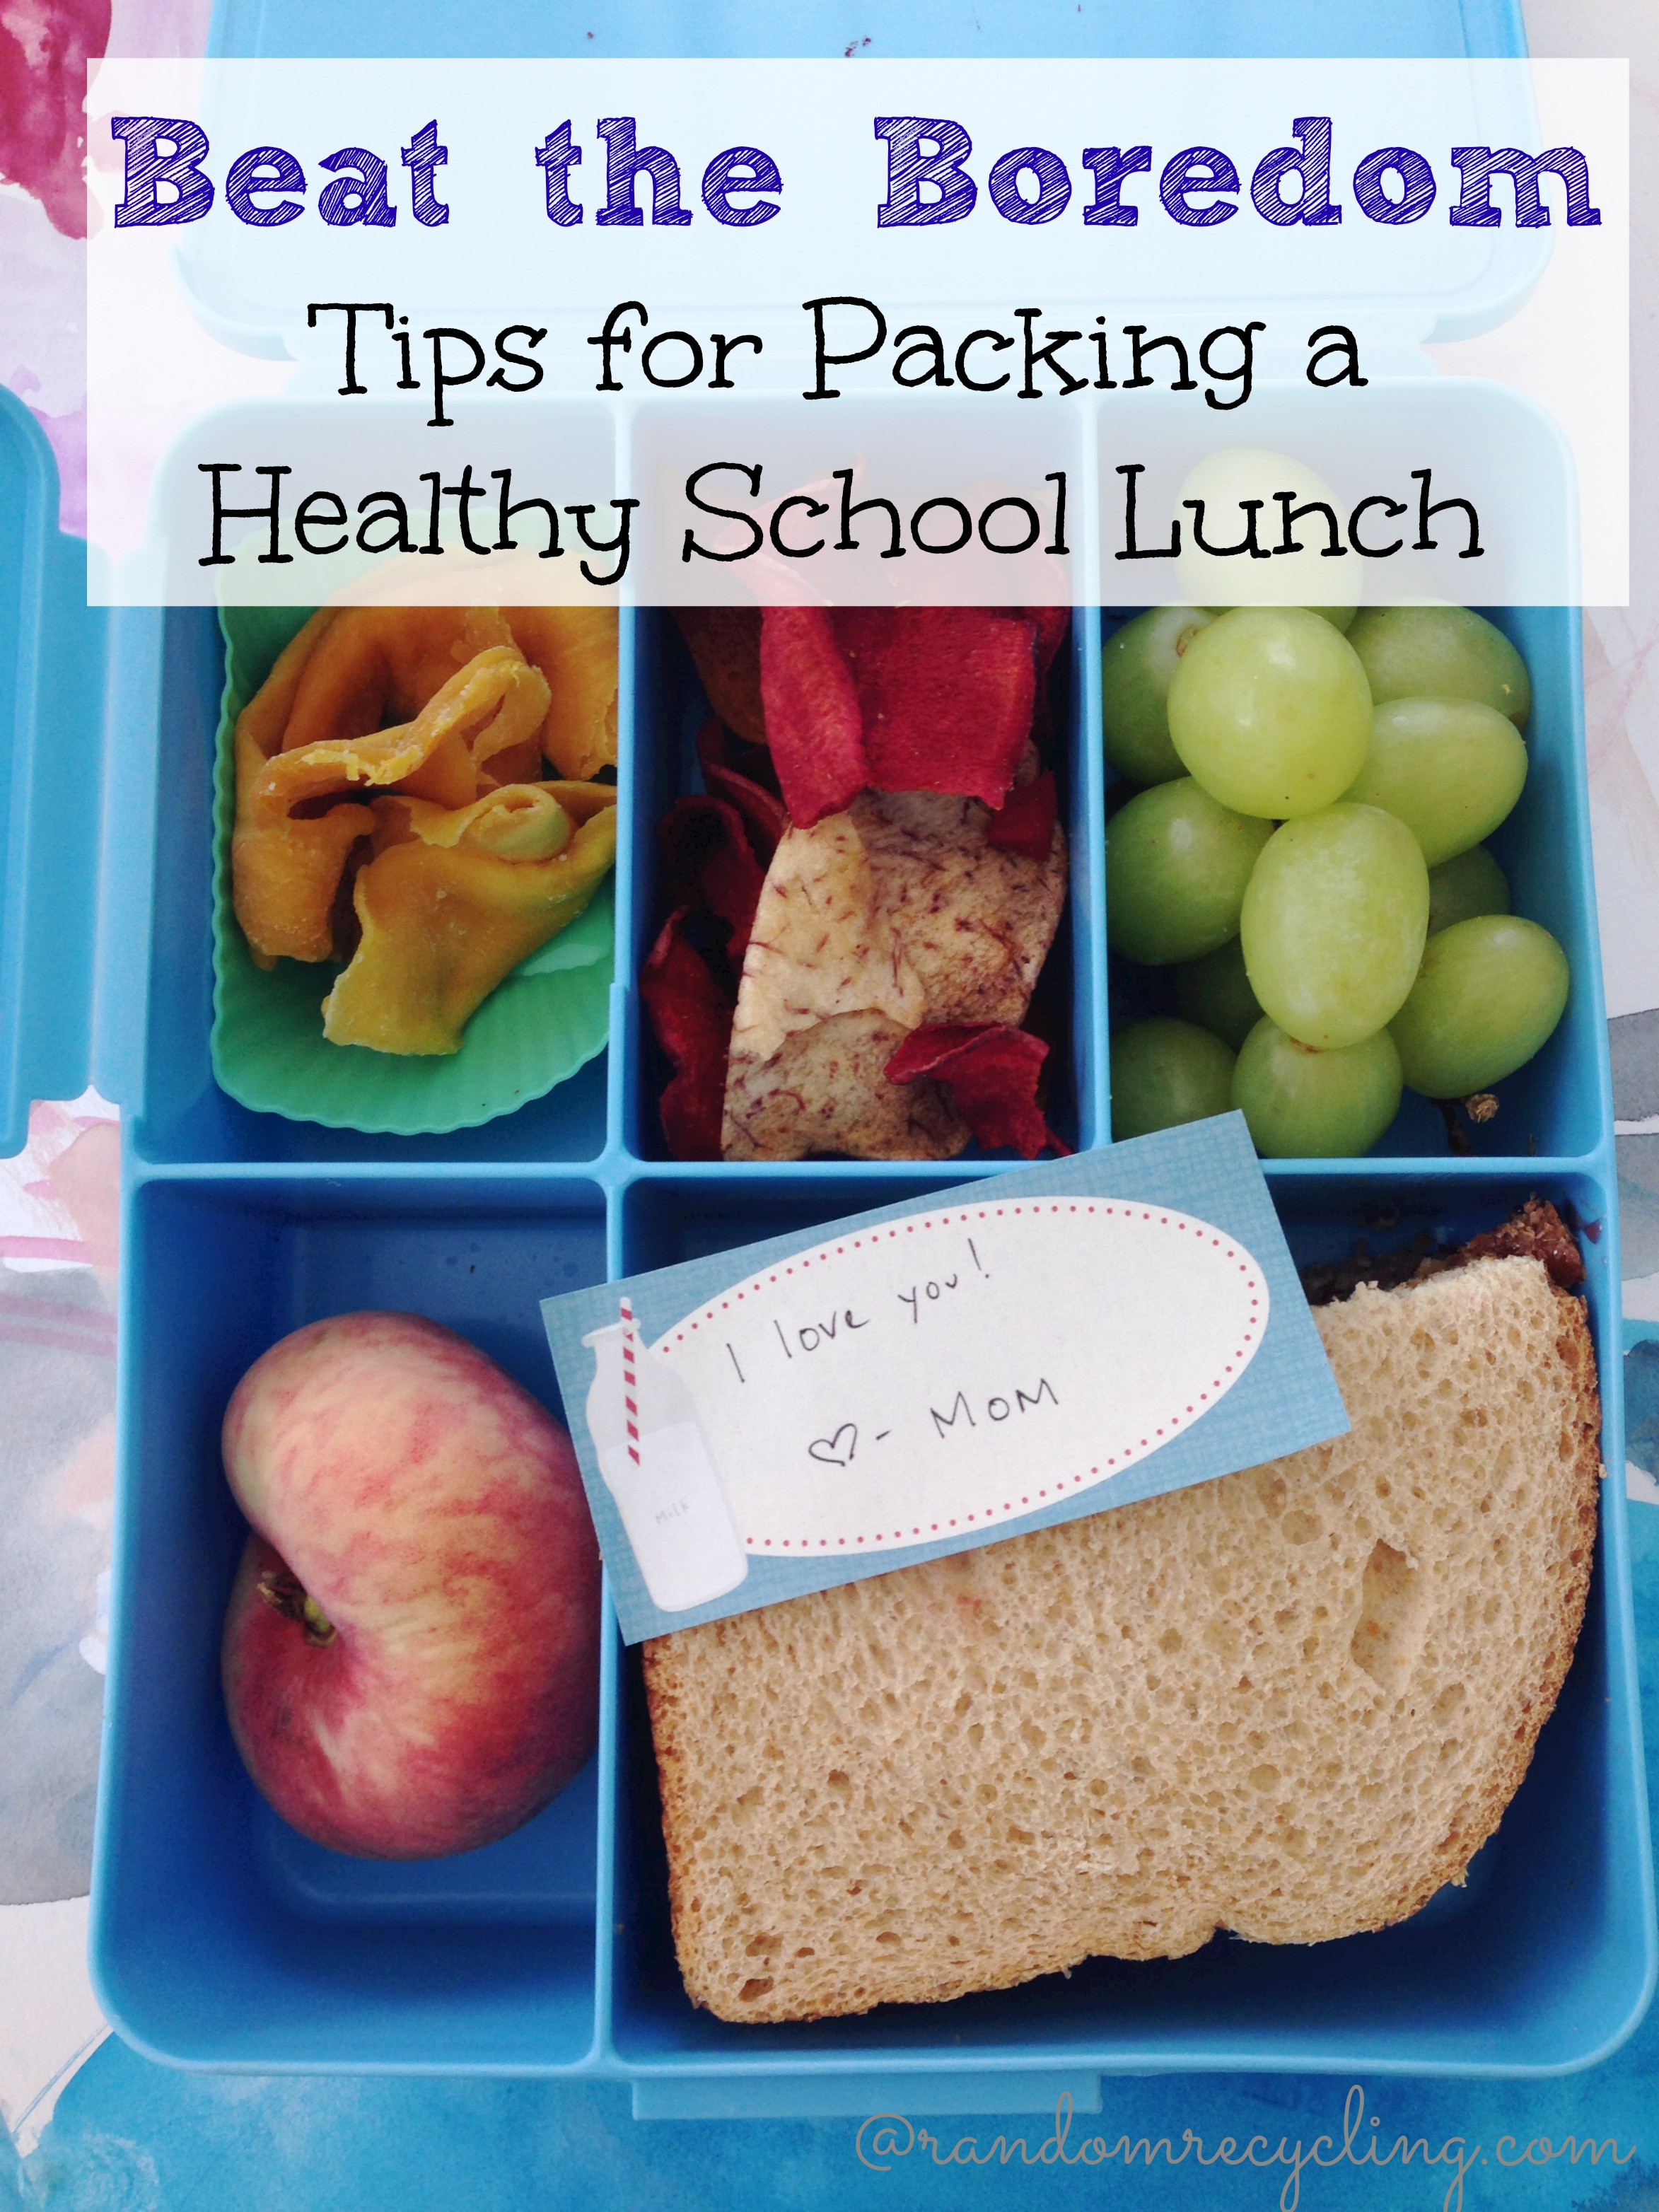 Healthy Lunches To Pack For School
 Inspire Healthy Habits in Kids through the Lunch Box